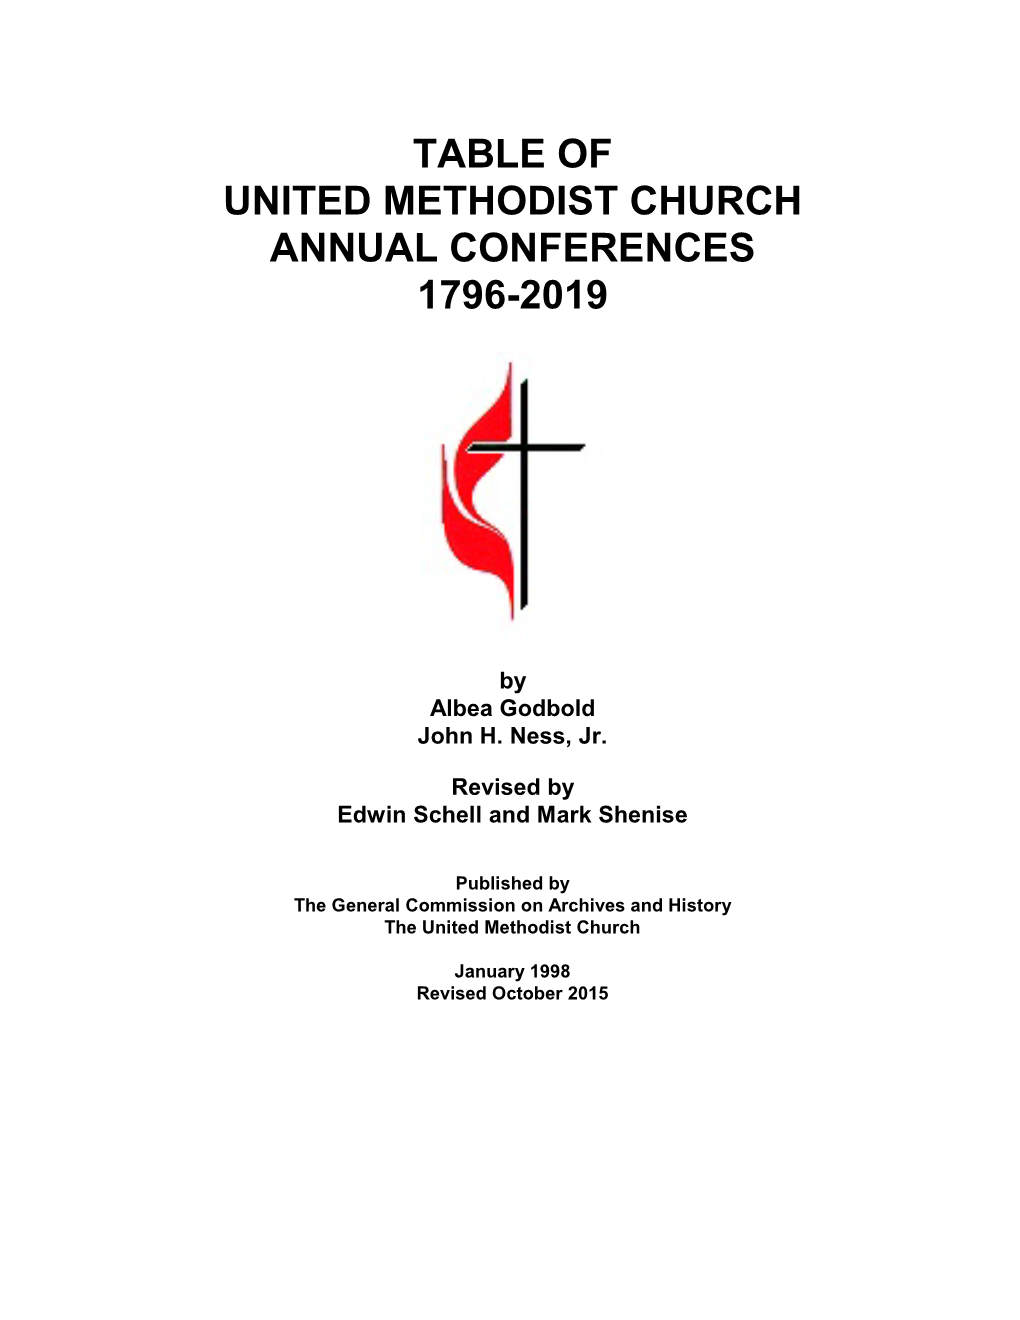 Table of United Methodist Church Annual Conferences 1796-2019